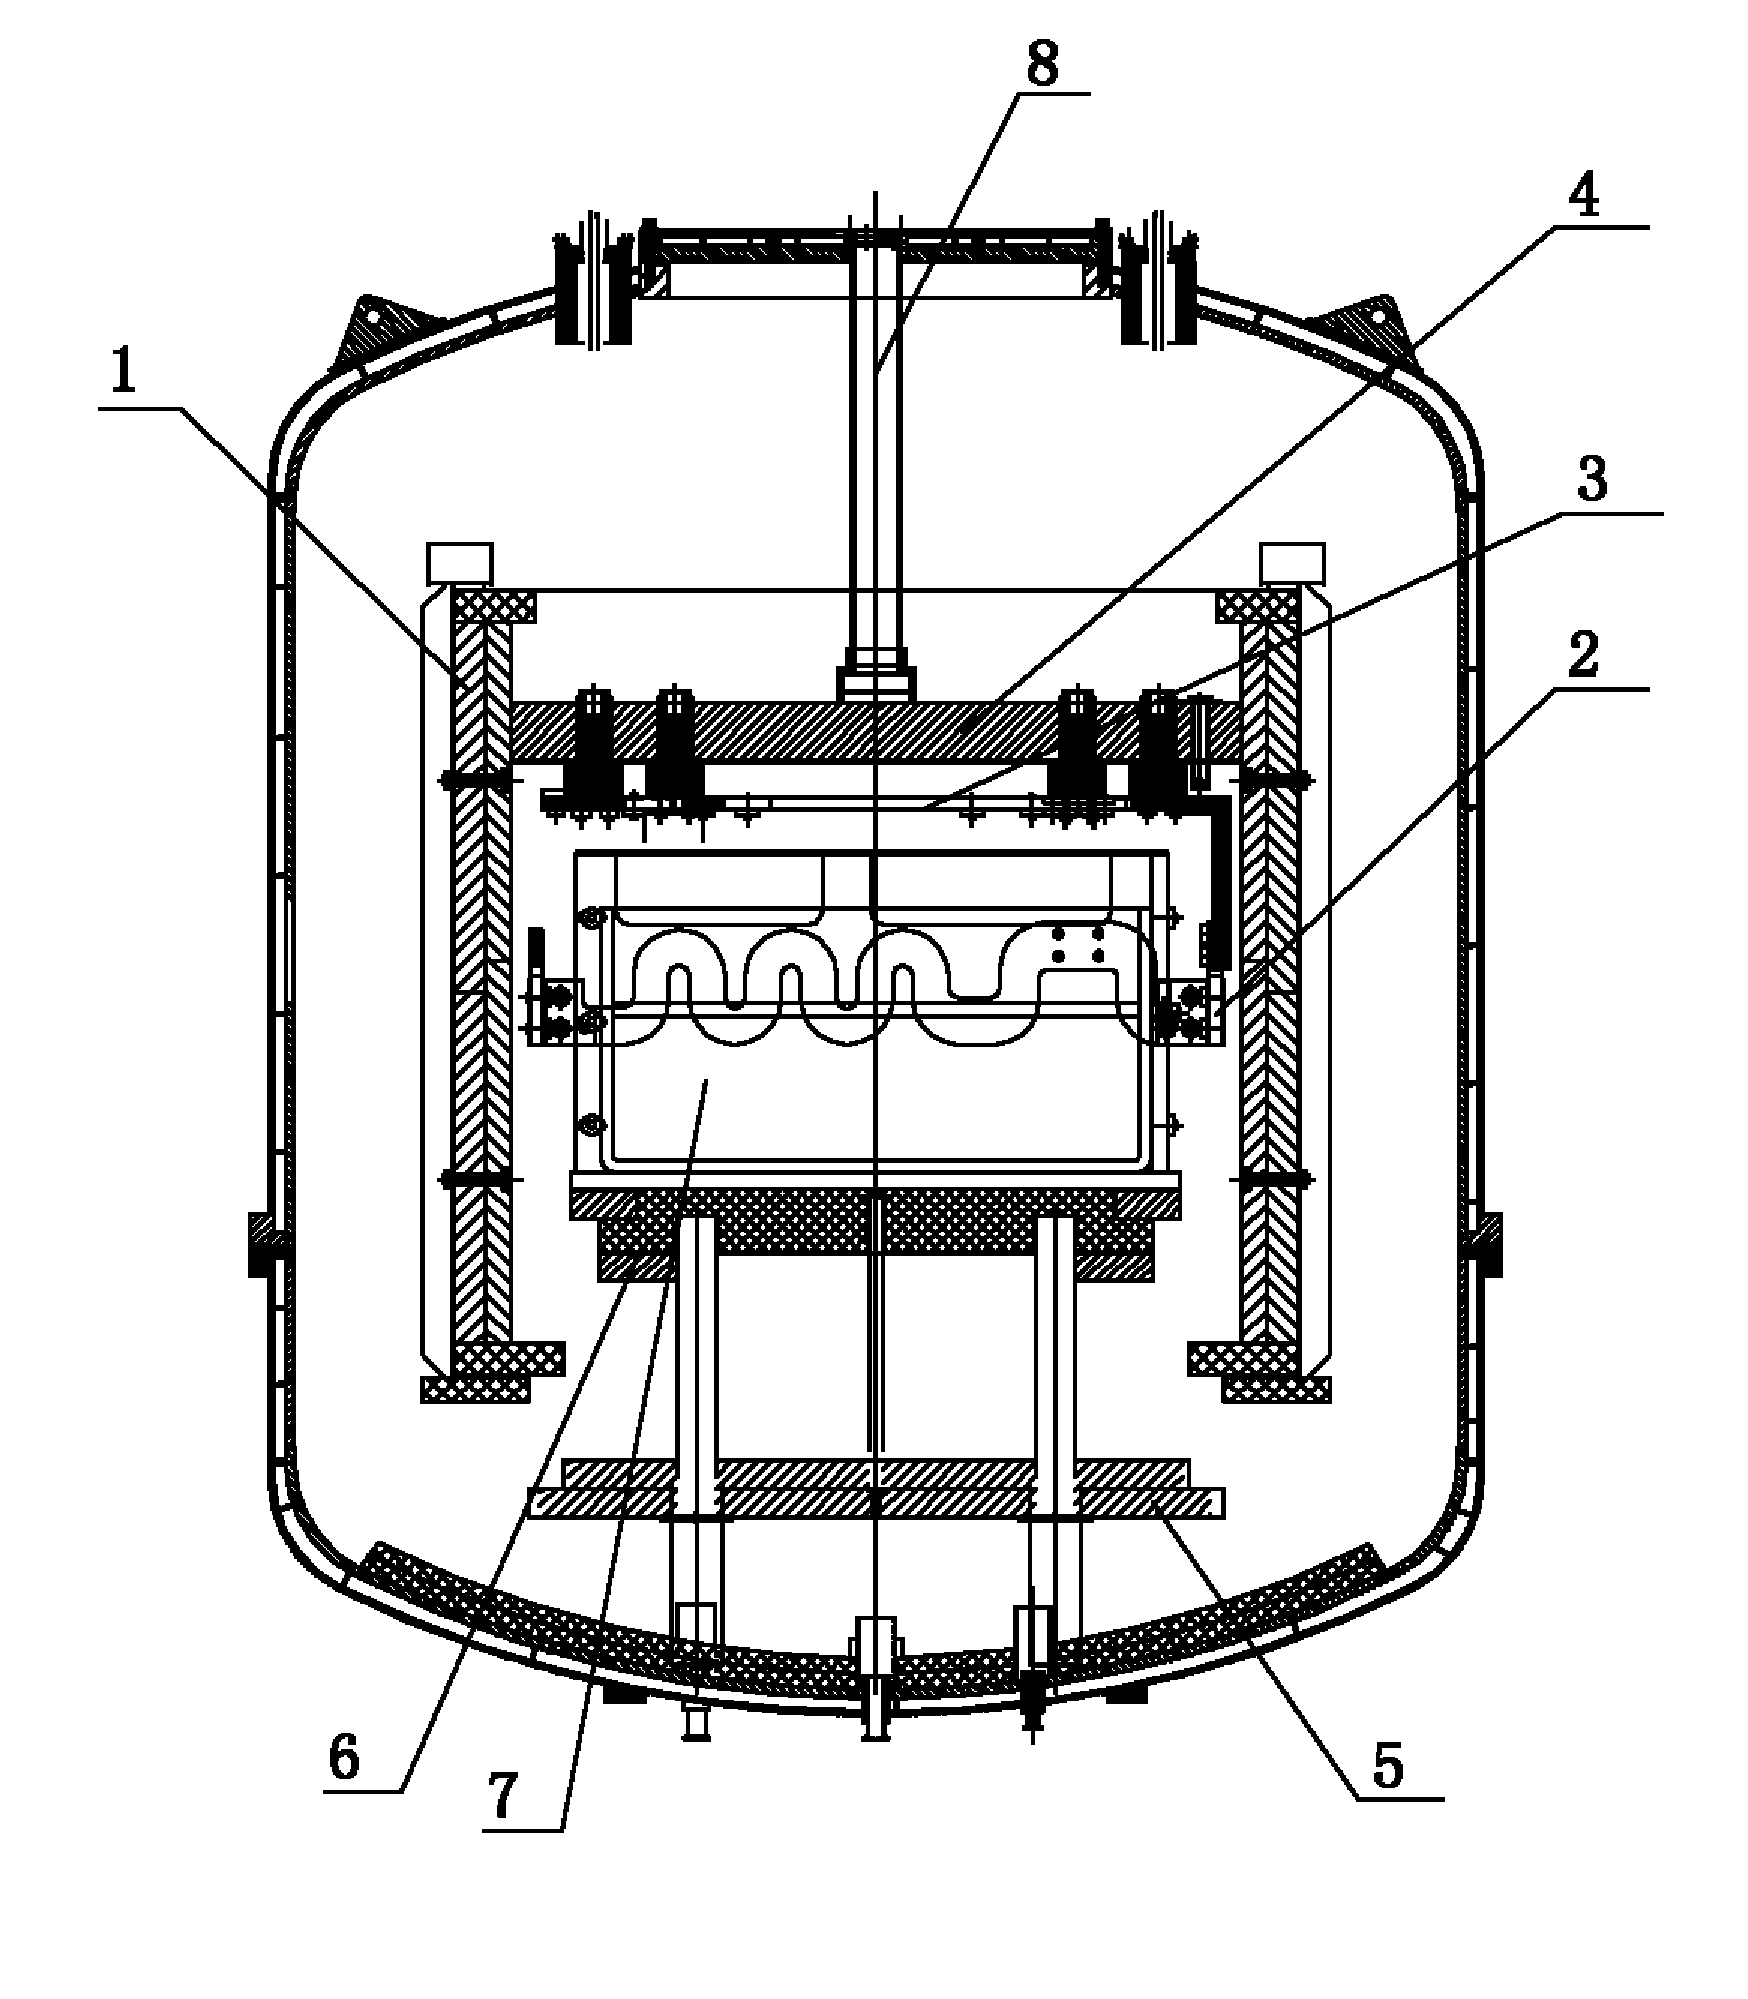 Three-stage thermal field of polysilicon ingot furnace